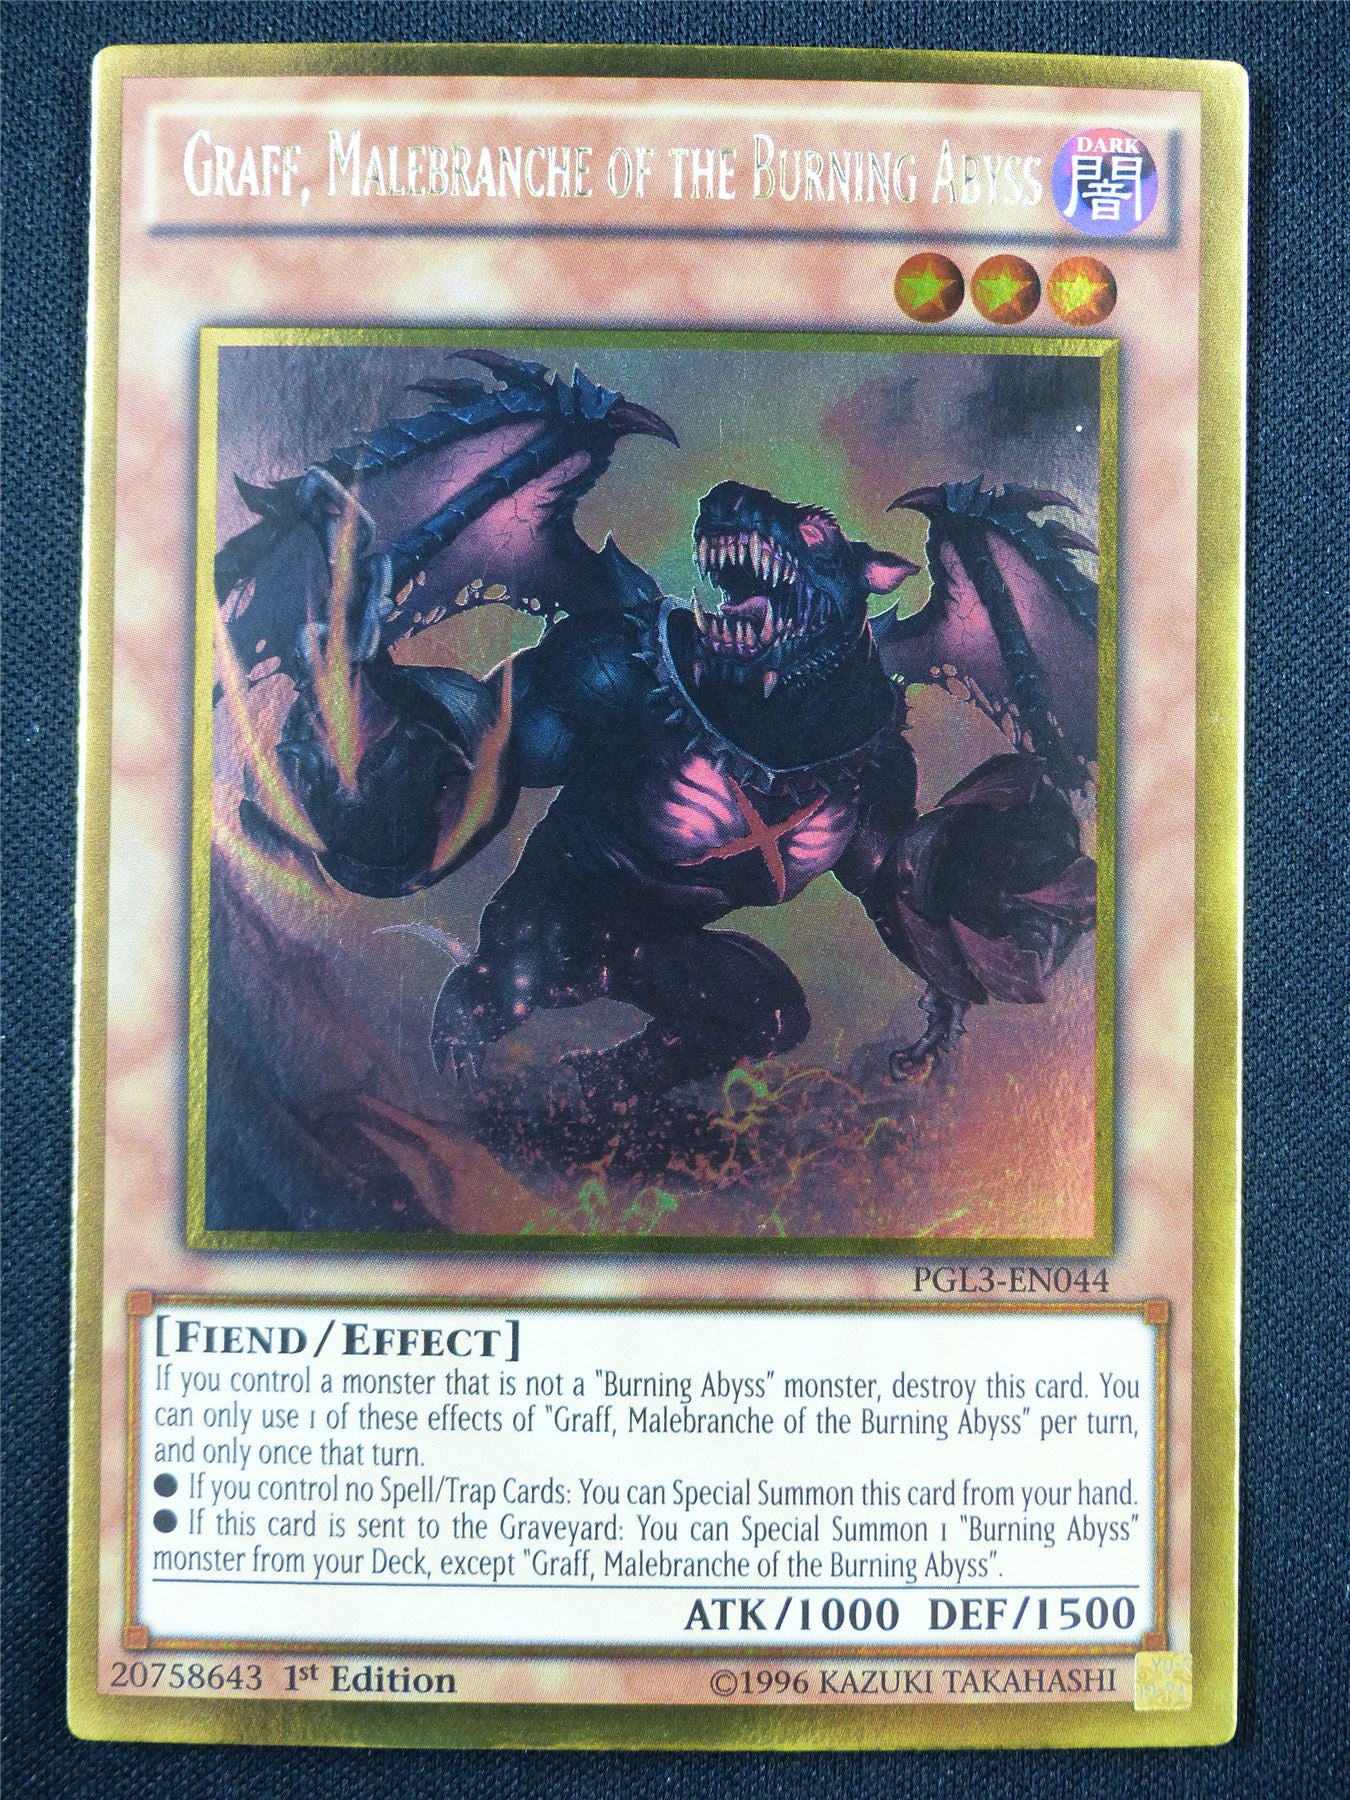 Graff Malebranche of the Burning Abyss PGL3 Gold Rare - 1st ed Yugioh Card #3F6